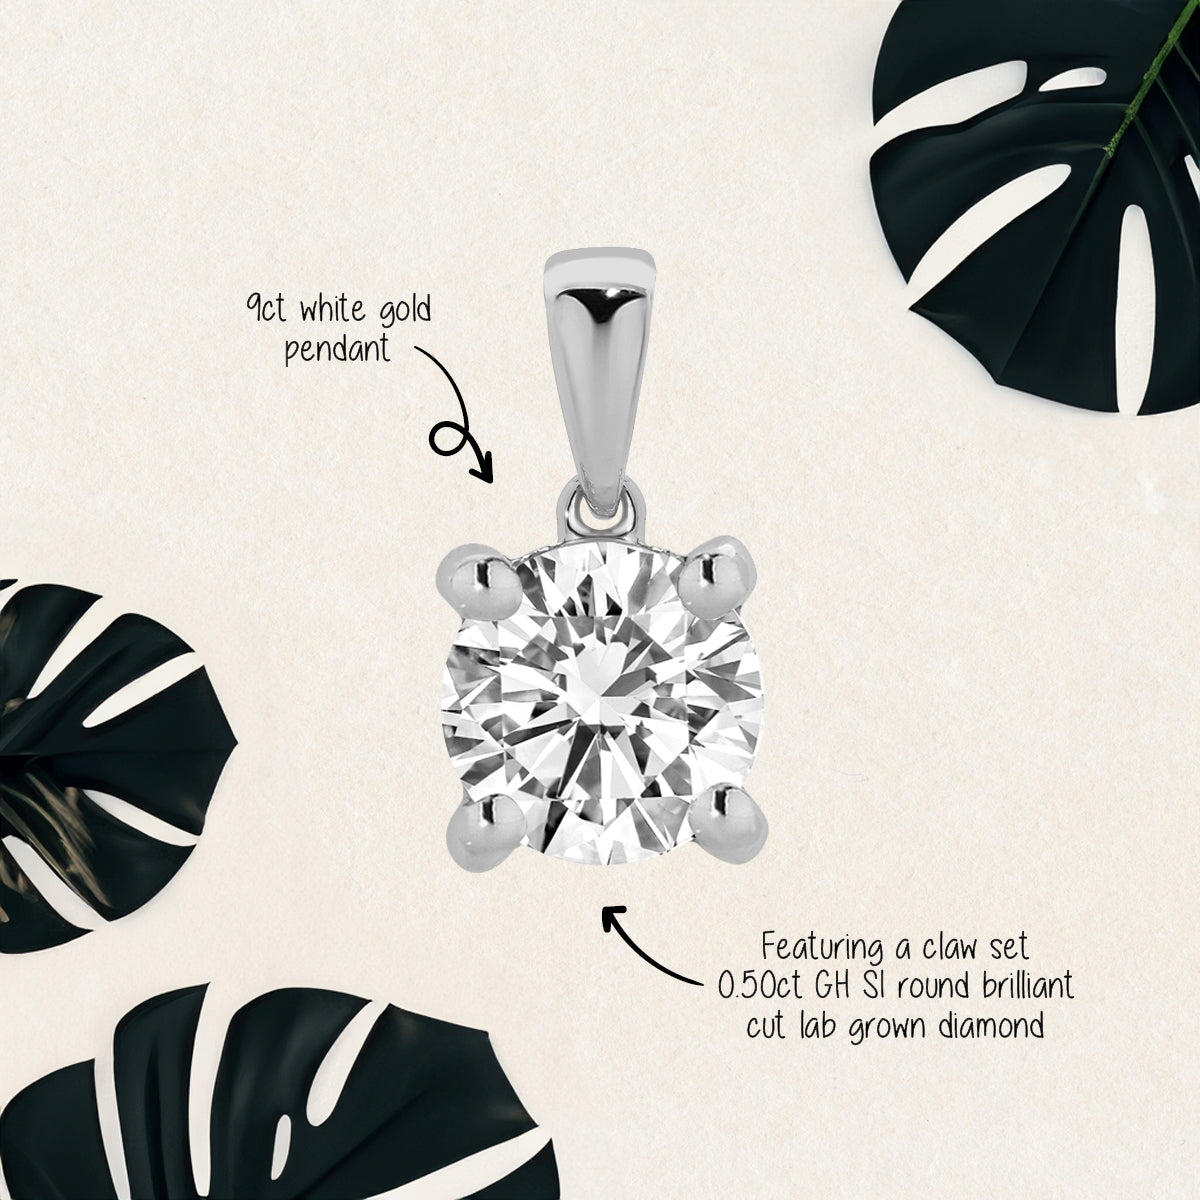 Featuring 0.50ct GH SI round brilliant cut lab grown diamond Claw pendant by greenhouse diamonds